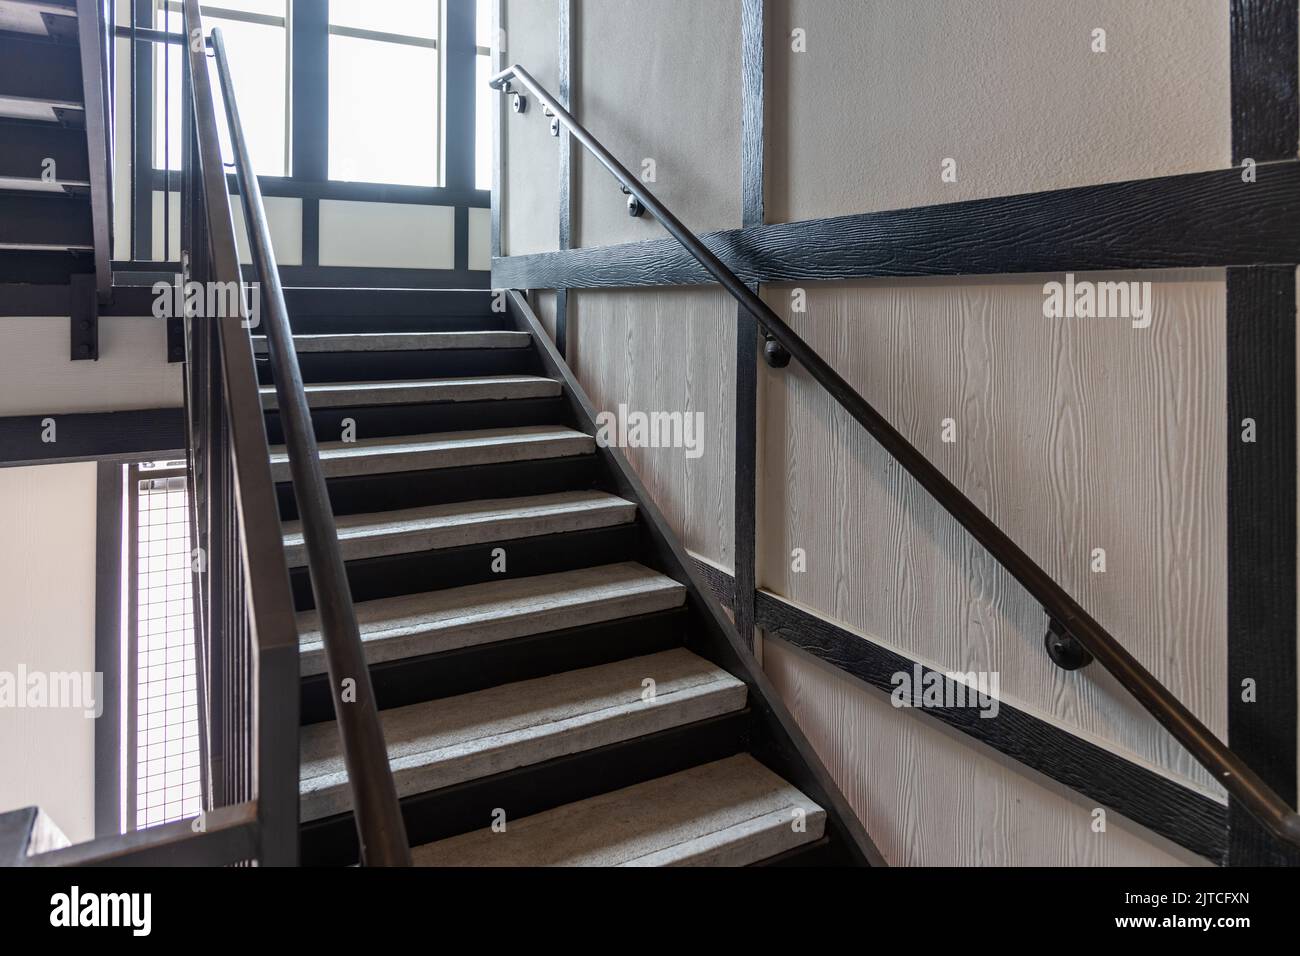 Stainless steel and wood railing. Fall Protection, modern design of handrail and staircase Stock Photo